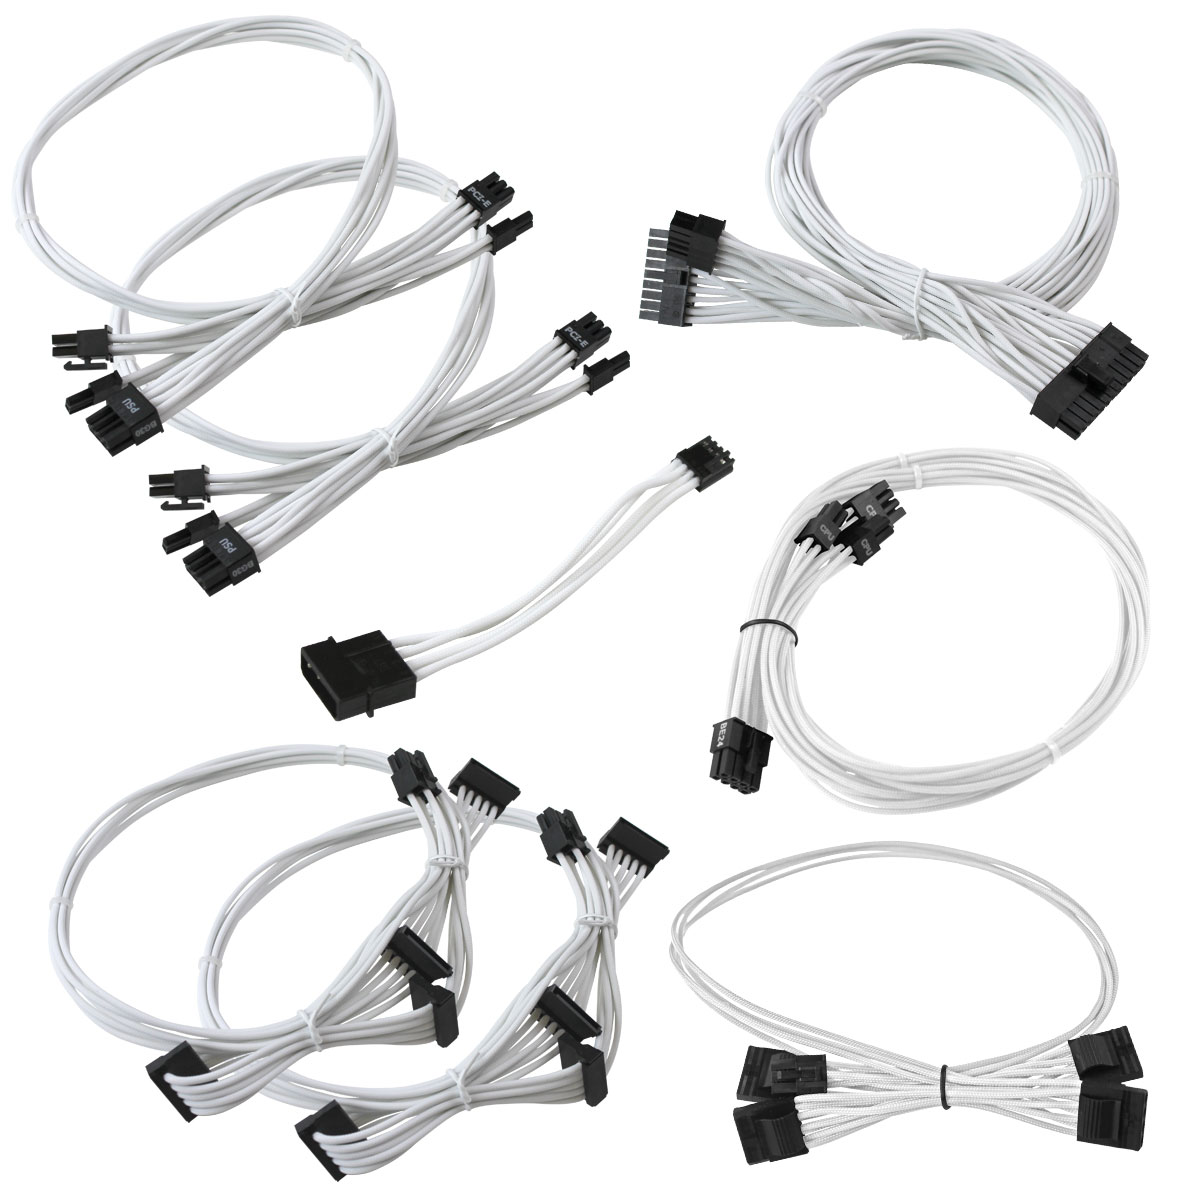 EVGA - Products - GS (550/650) White Power Supply Cable Set